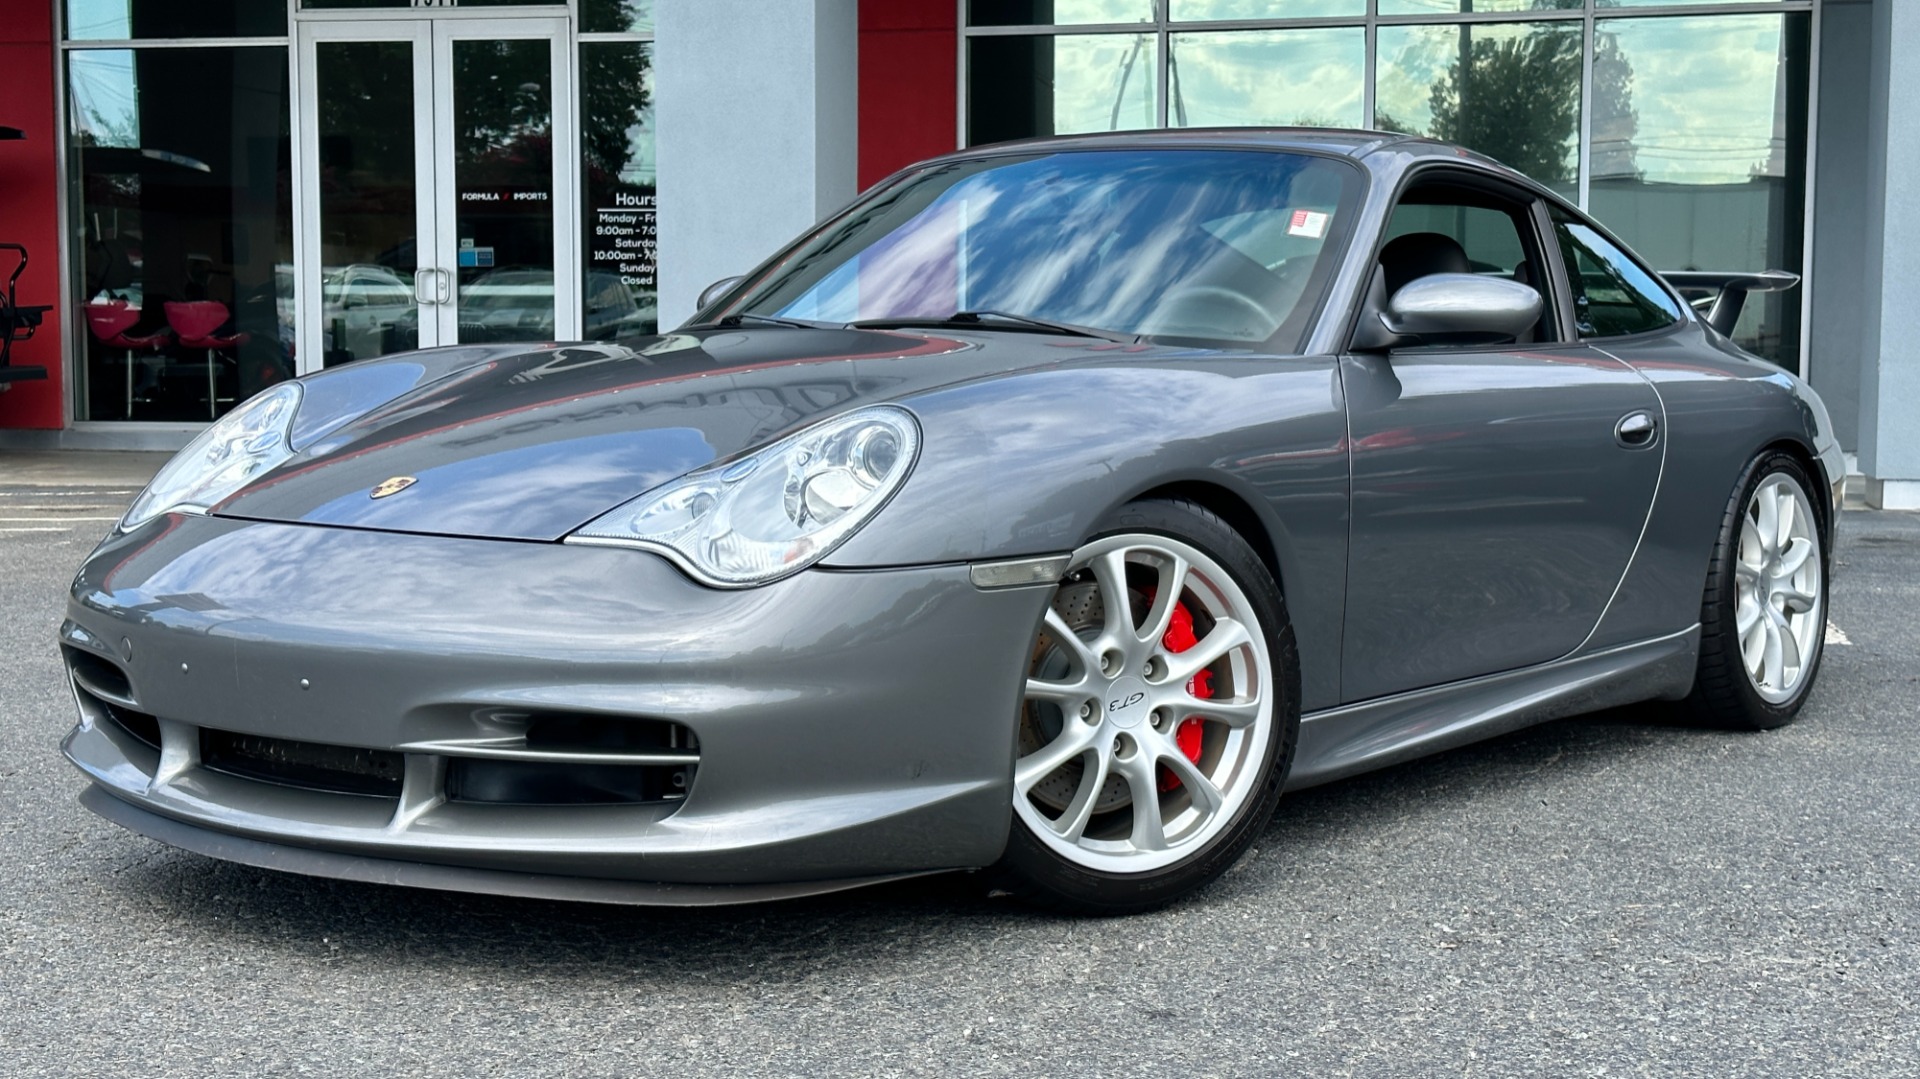 Used 2004 Porsche 911 GT3 / SPORTS SEATS / SERVICE BINDER / CLEAN DME for sale $121,900 at Formula Imports in Charlotte NC 28227 1